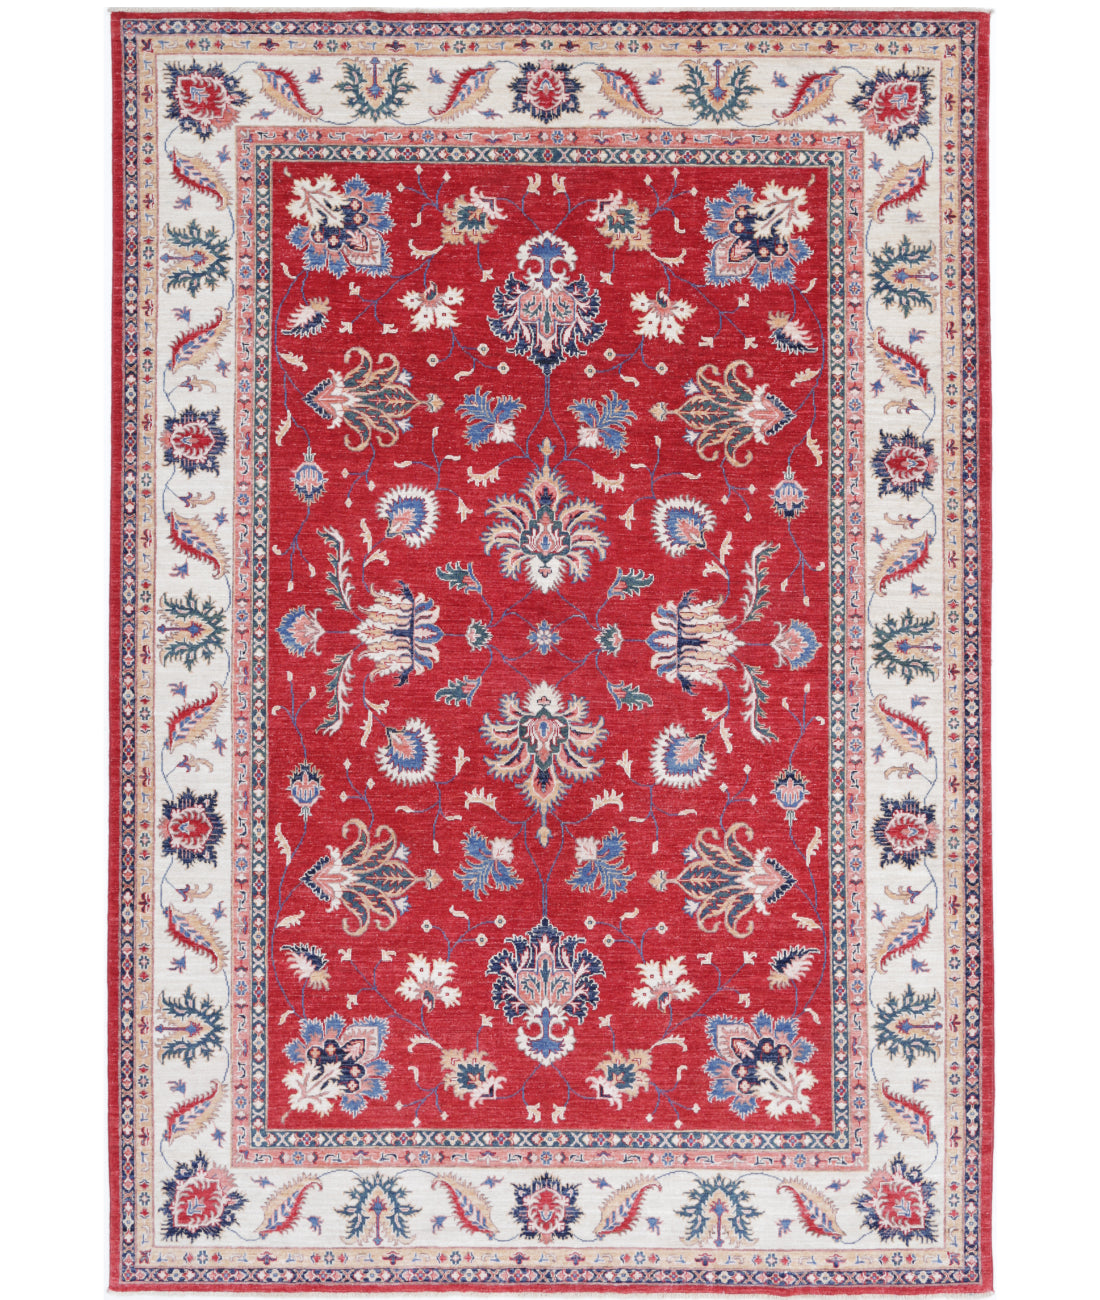 Hand Knotted Ziegler Farhan Wool Rug - 6'6'' x 9'4'' 6'6'' x 9'4'' (195 X 280) / Red / Ivory